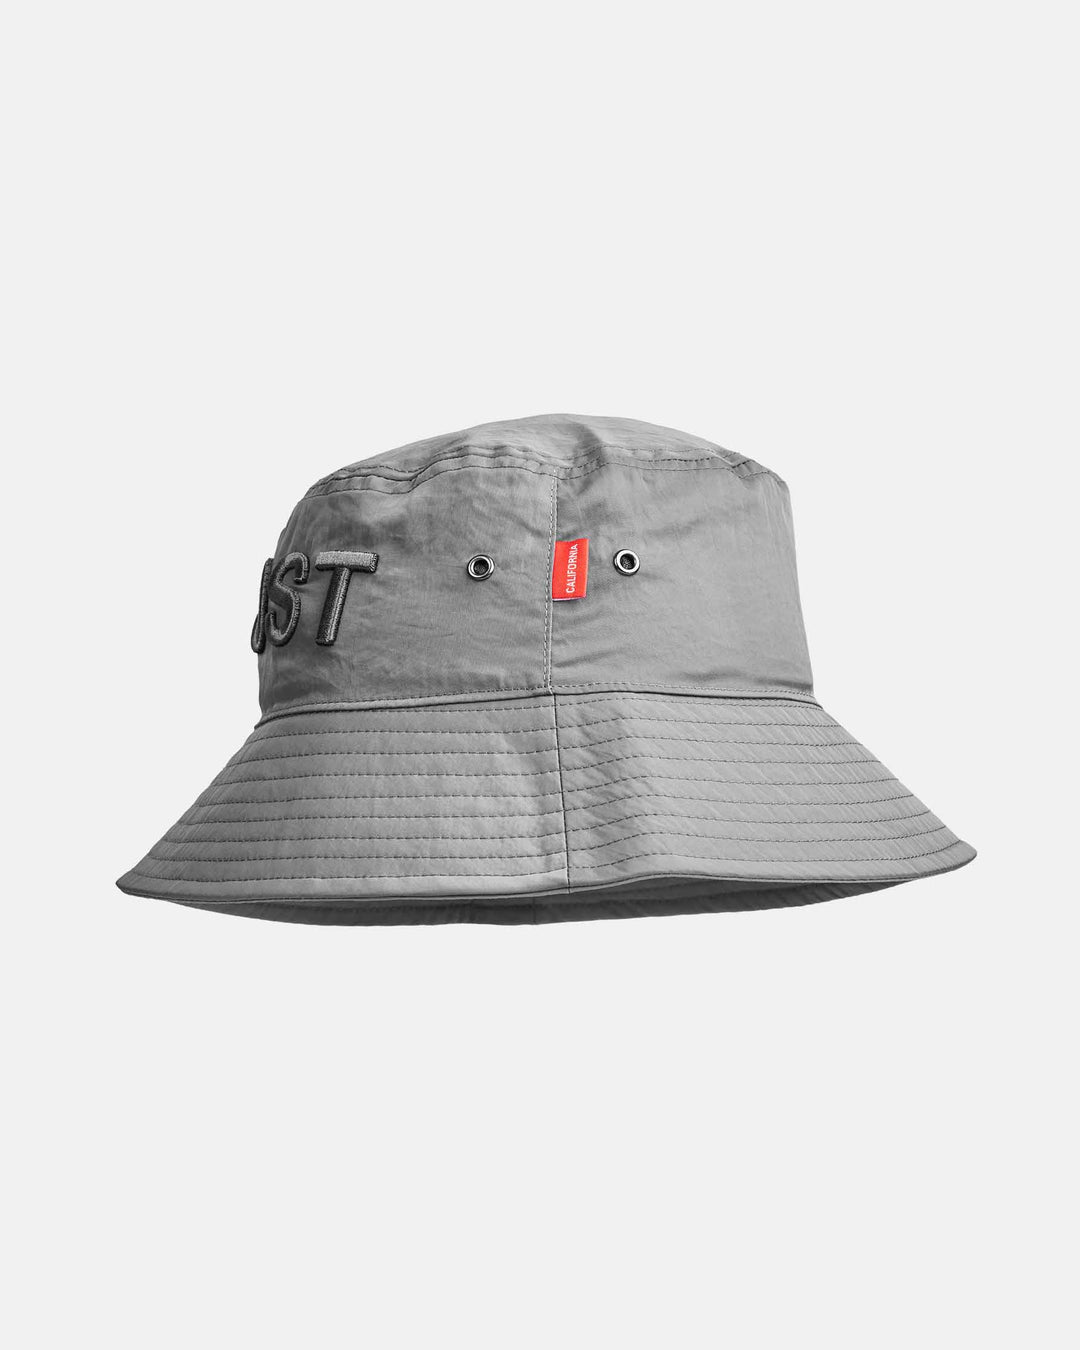 GHOST BUCKET HAT - PLAY FEARLESSLY (EMB)